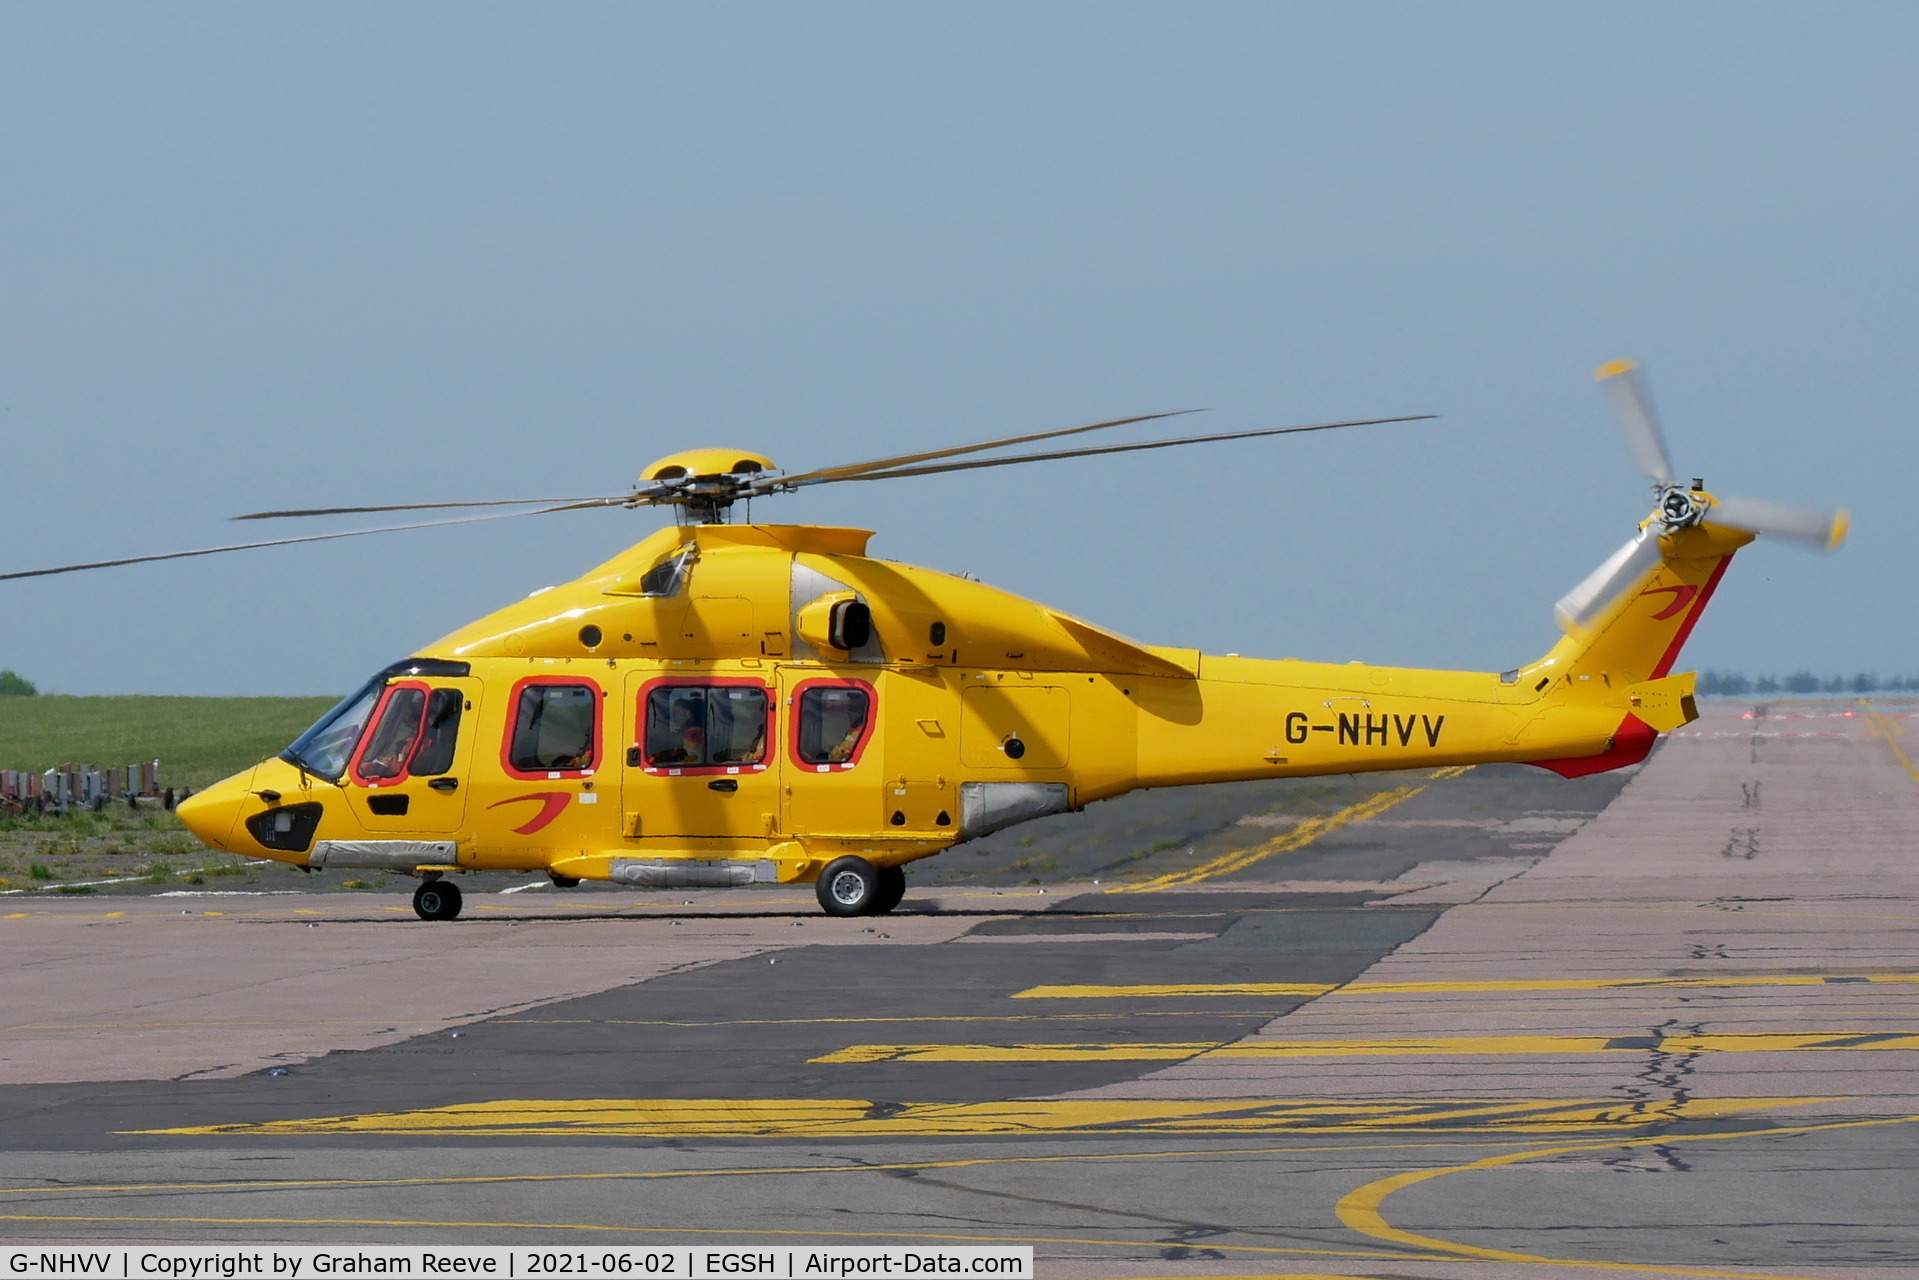 G-NHVV, 2014 Airbus Helicopters EC-175B C/N 5002, Just landed at Norwich.